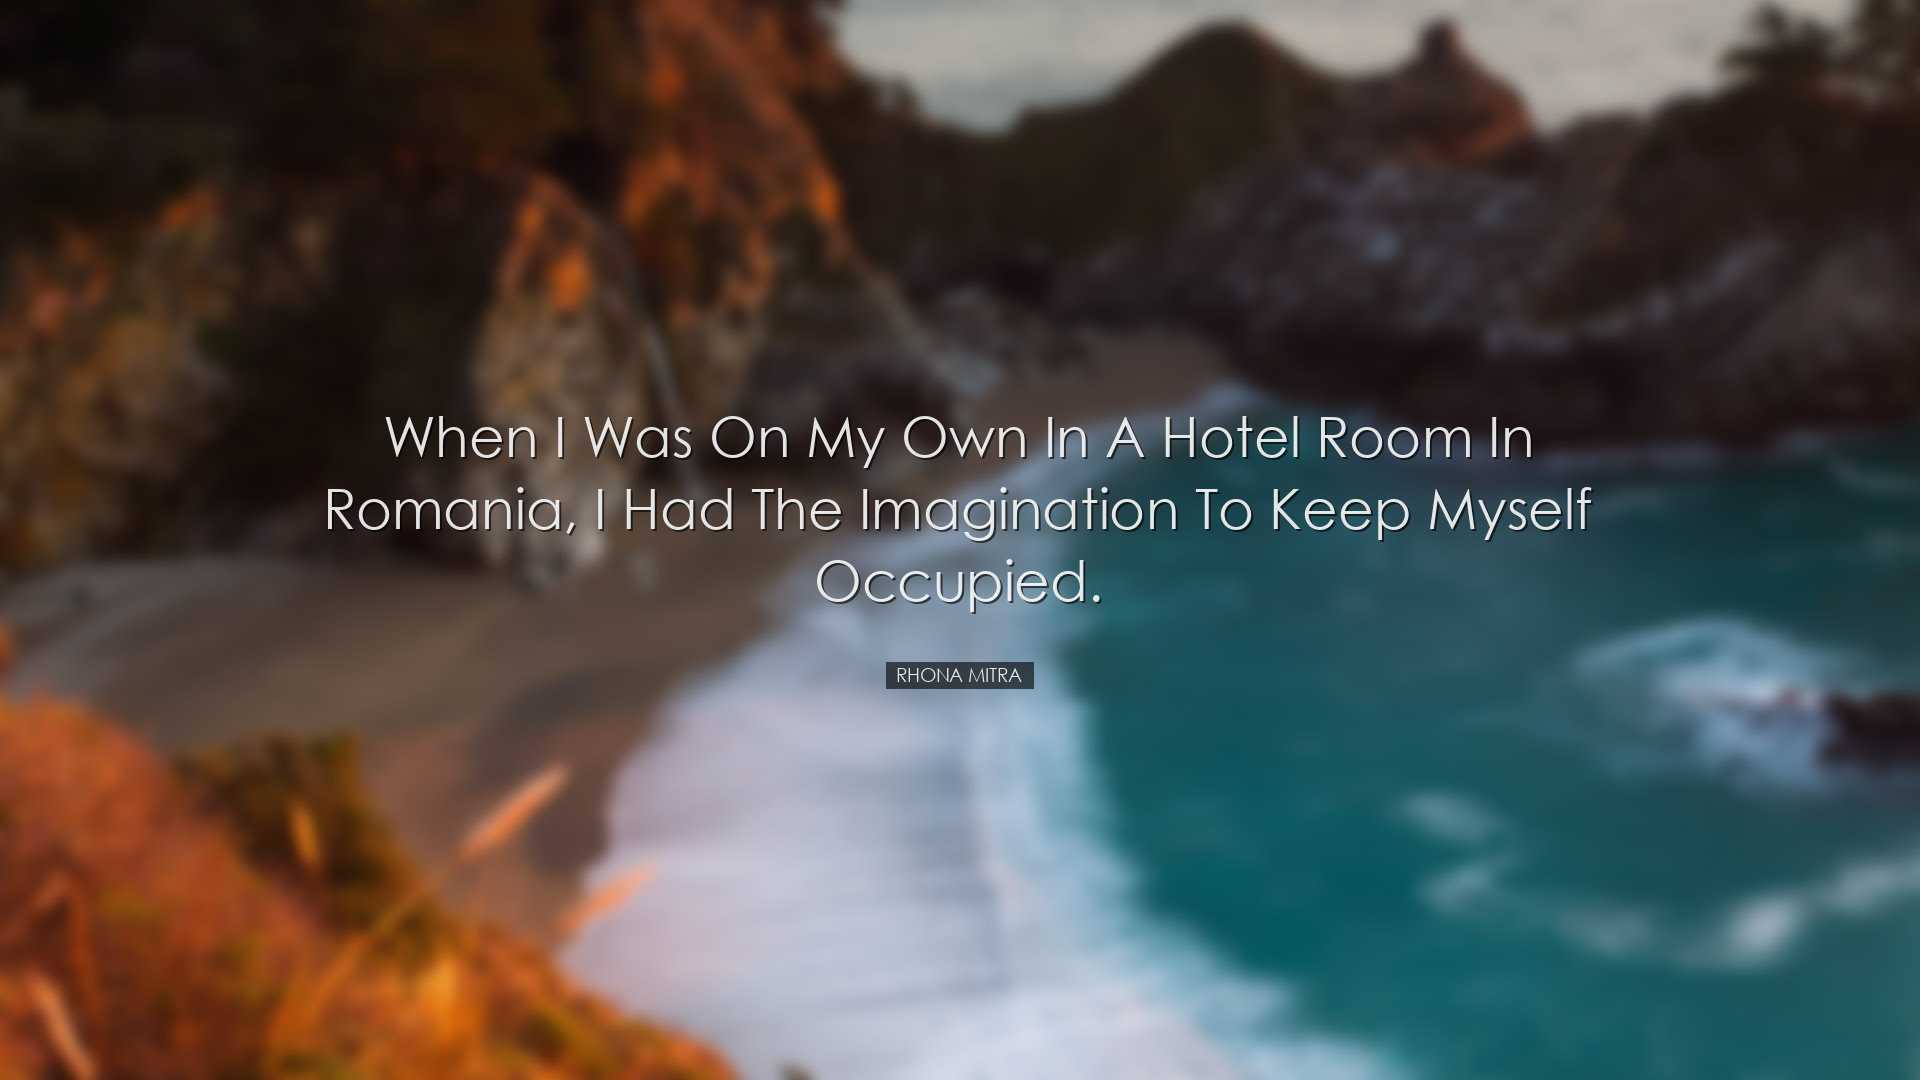 When I was on my own in a hotel room in Romania, I had the imagina